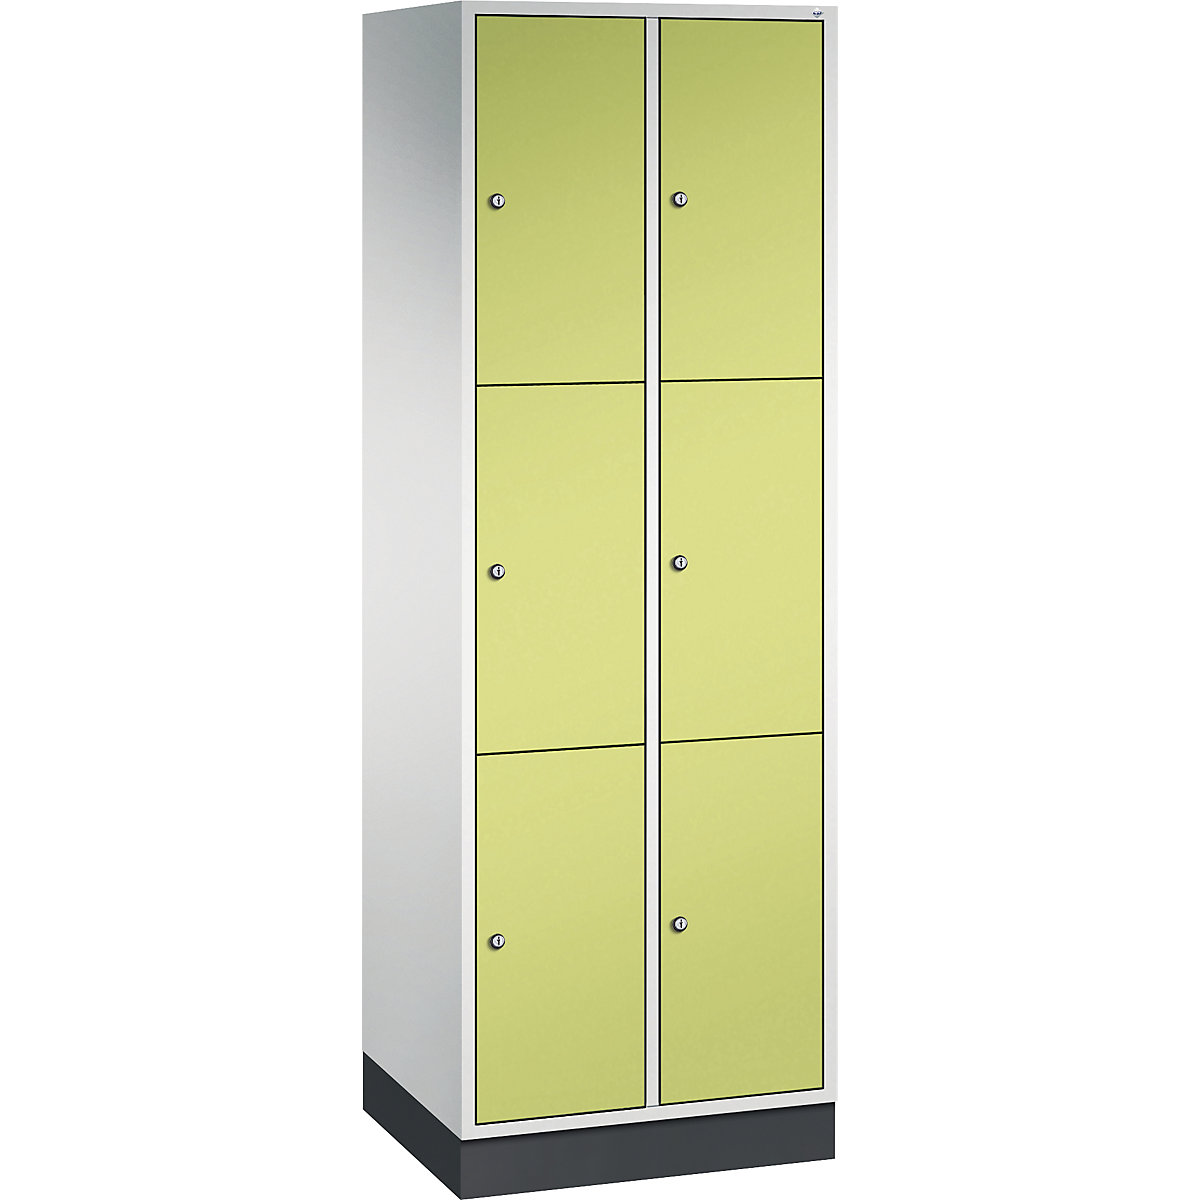 INTRO steel compartment locker, compartment height 580 mm – C+P, WxD 620 x 500 mm, 6 compartments, light grey body, viridian green doors